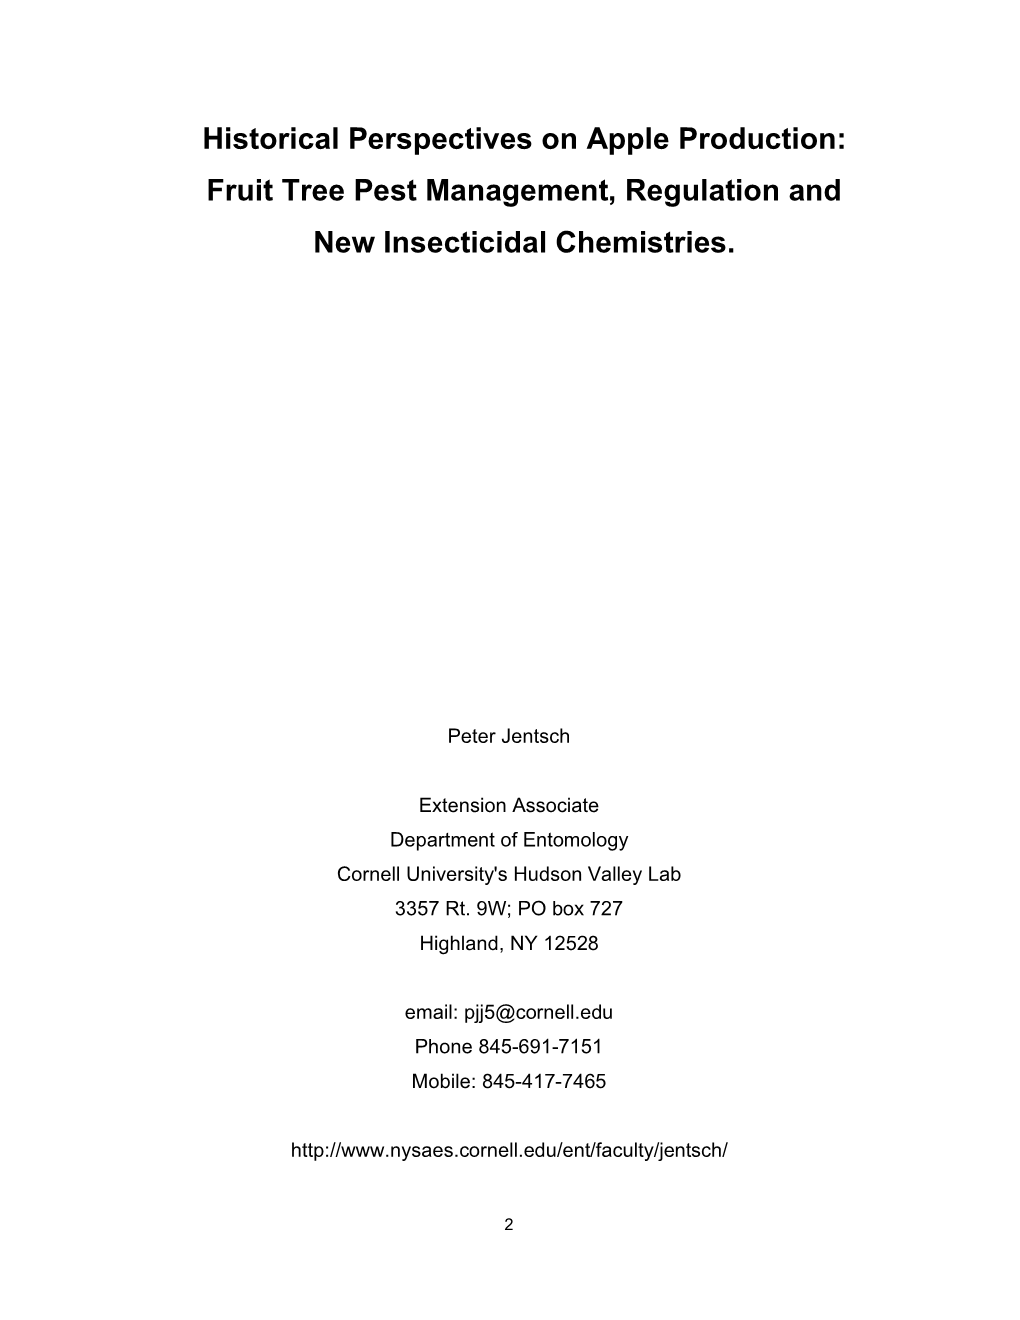 Historical Perspectives on Apple Production: Fruit Tree Pest Management, Regulation and New Insecticidal Chemistries